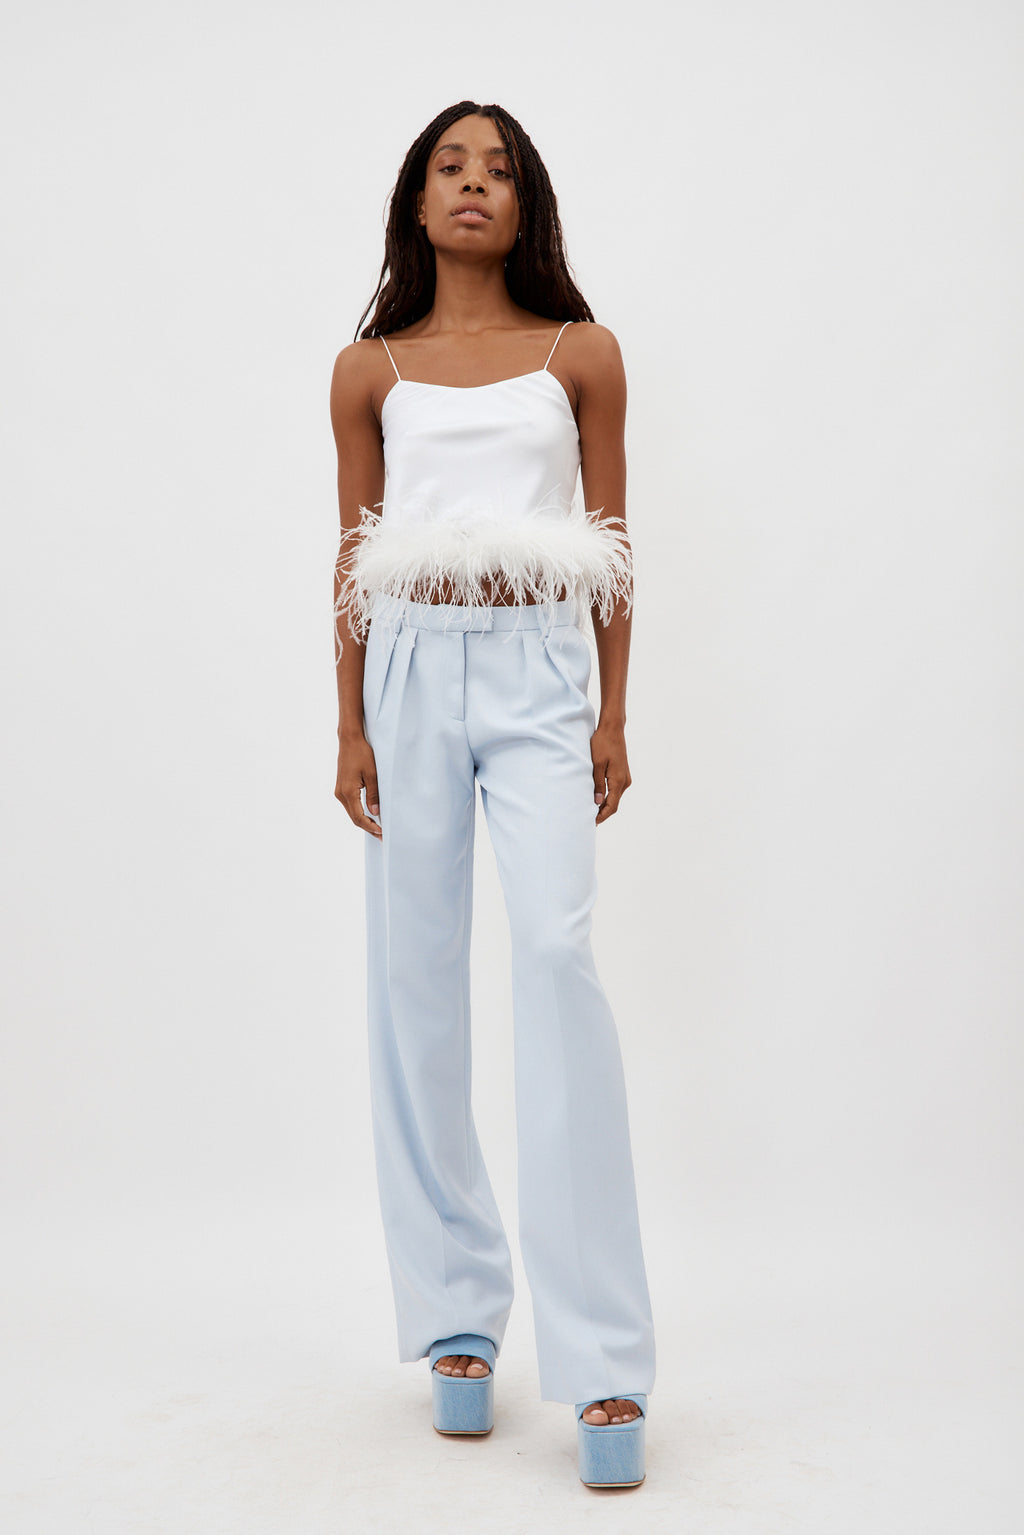 Bias White Camisole with Ostrich Feathers